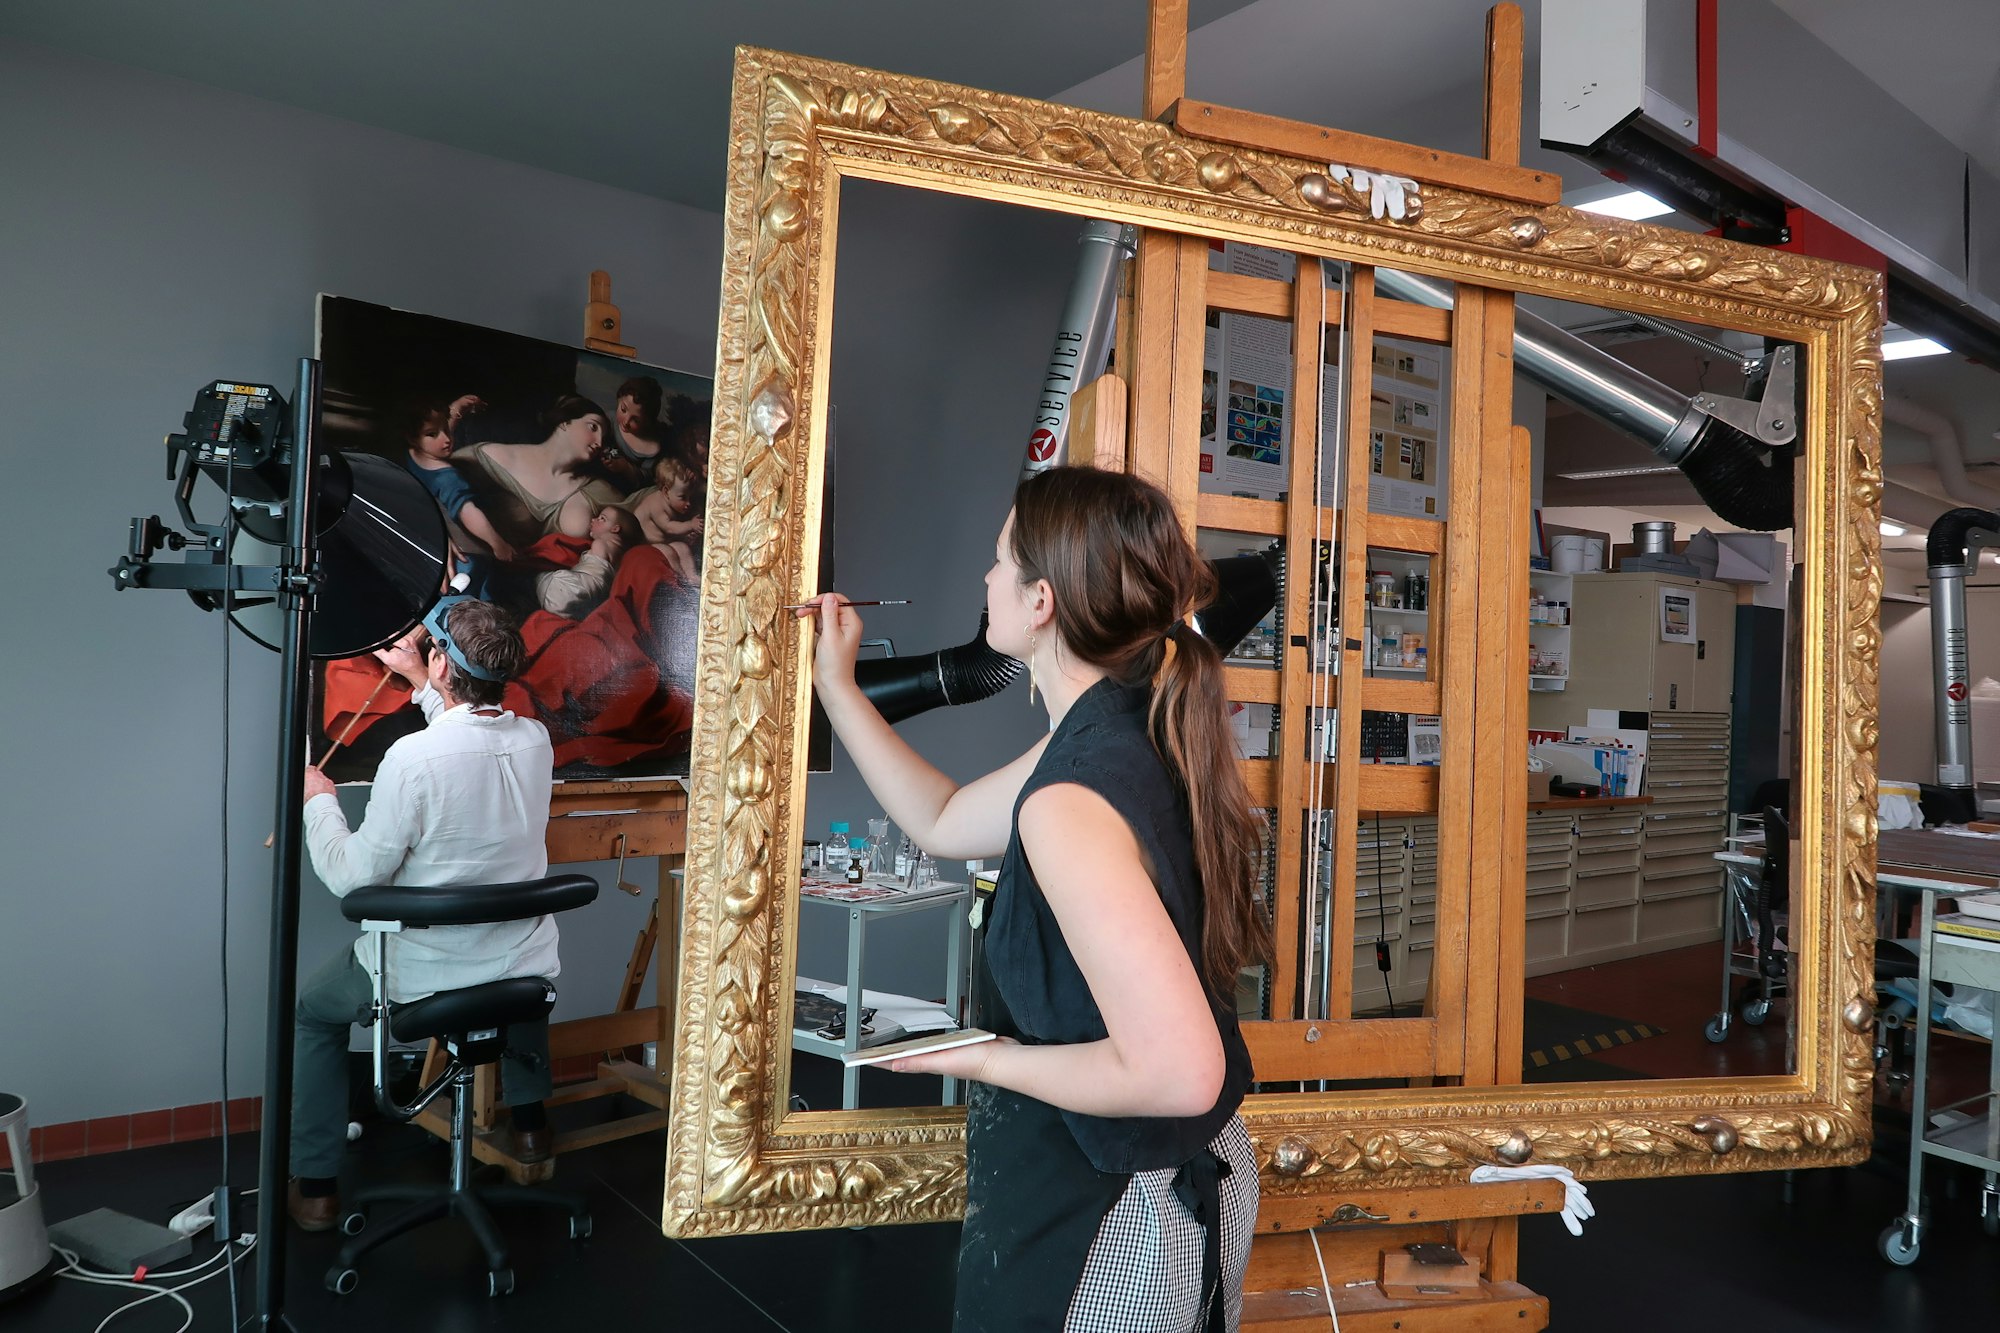 A person works on a painting on an easel while another person works on an ornate gold frame on an easel.